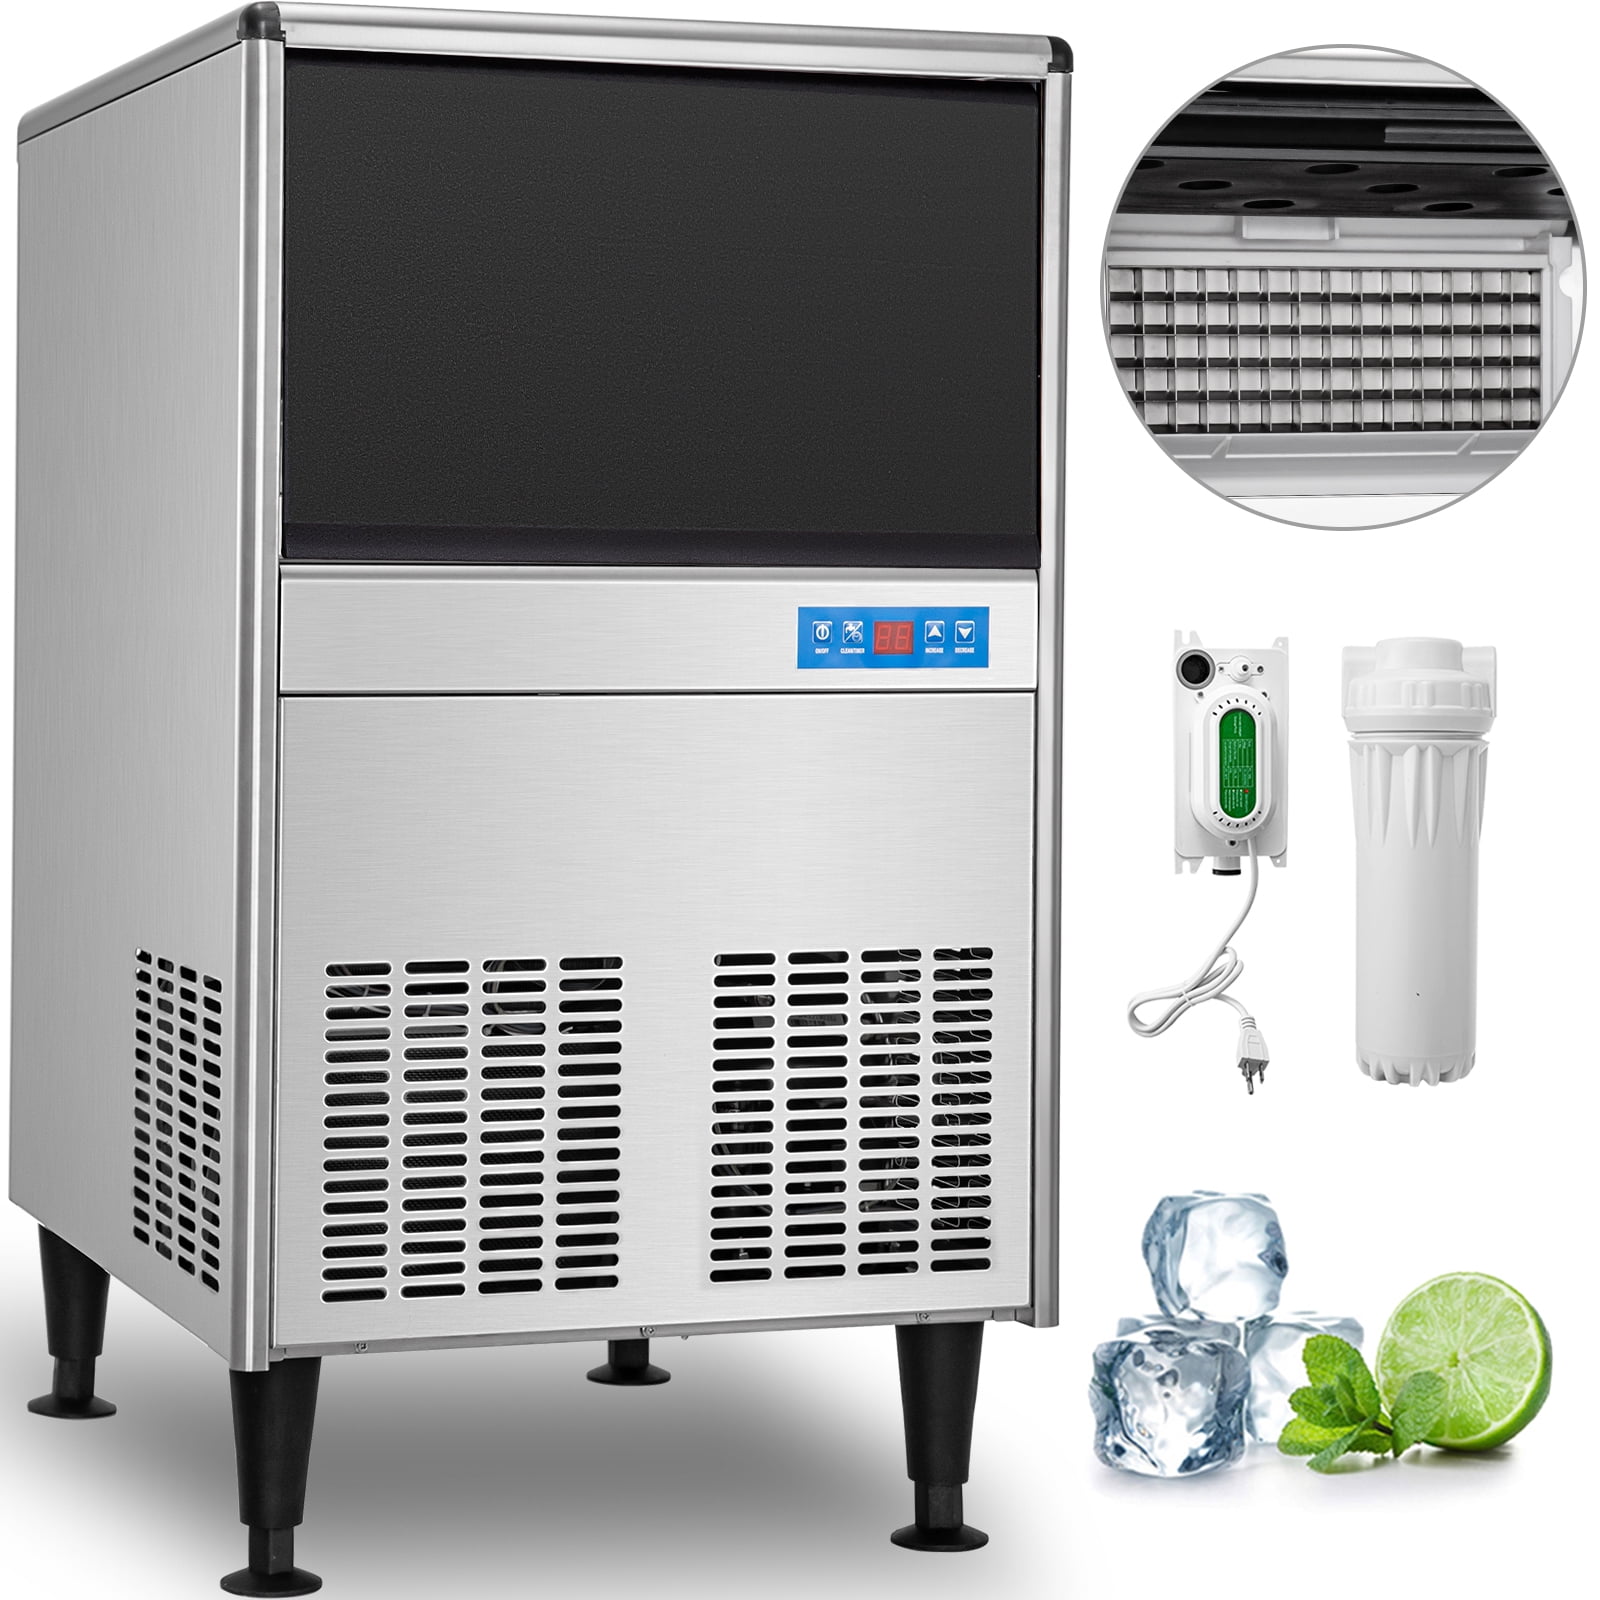 VEVOR 11-lbStorage Ice Maker 70-lb Flip-up Door Freestanding For Commercial  Use Cubed Ice Maker (Silver) in the Ice Makers department at